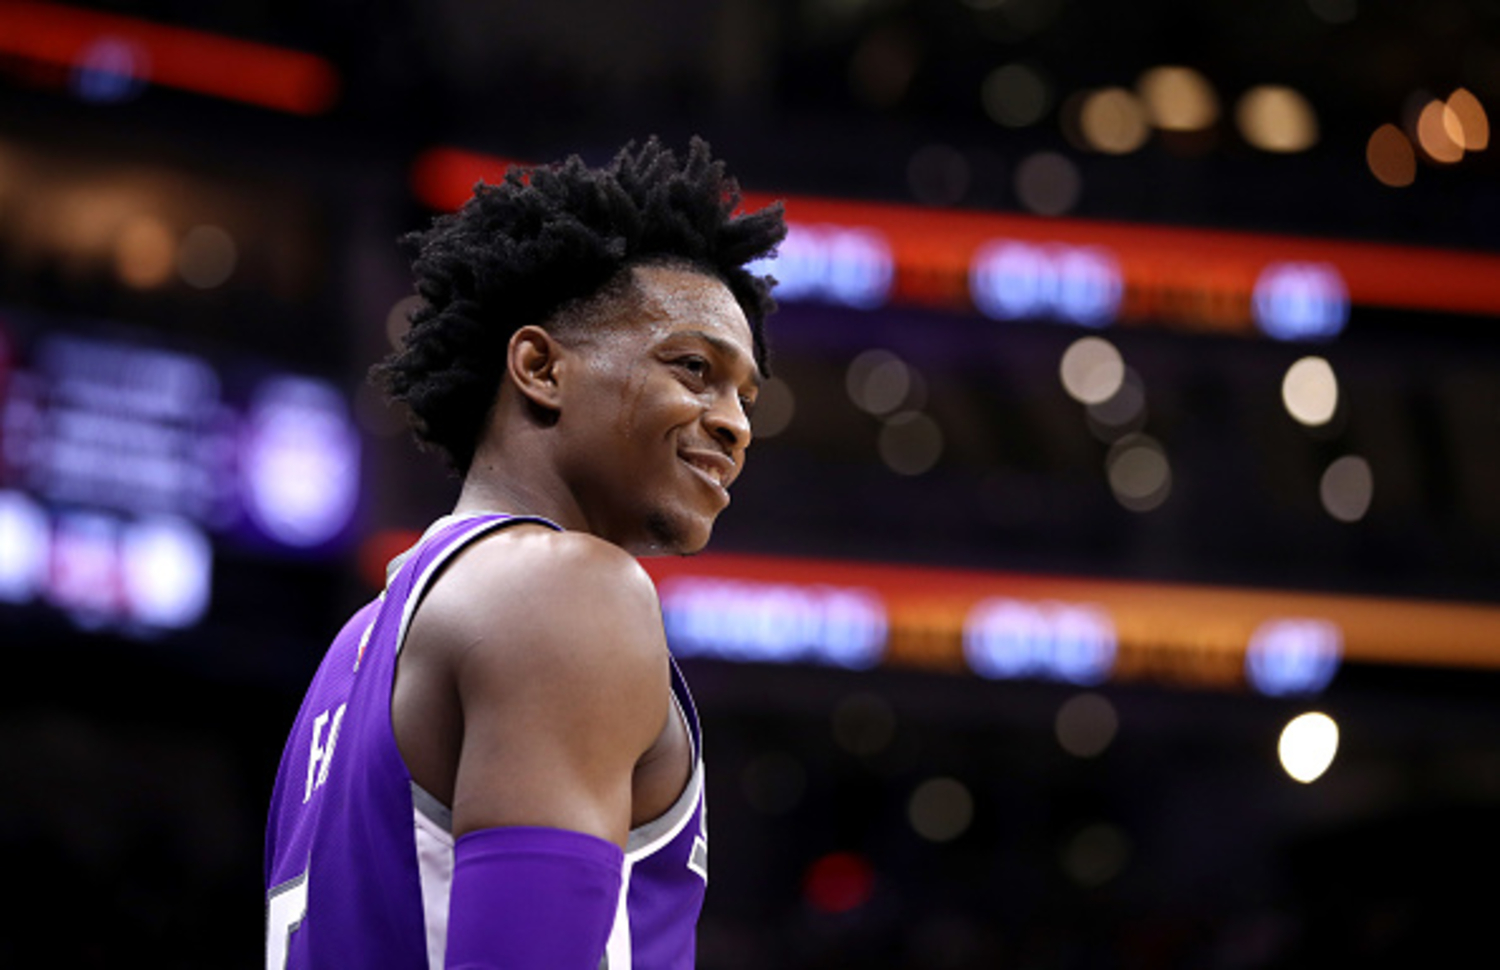 The Sacramento Kings Just Rewarded Their Star Guard a With Massive $163 Million Payday